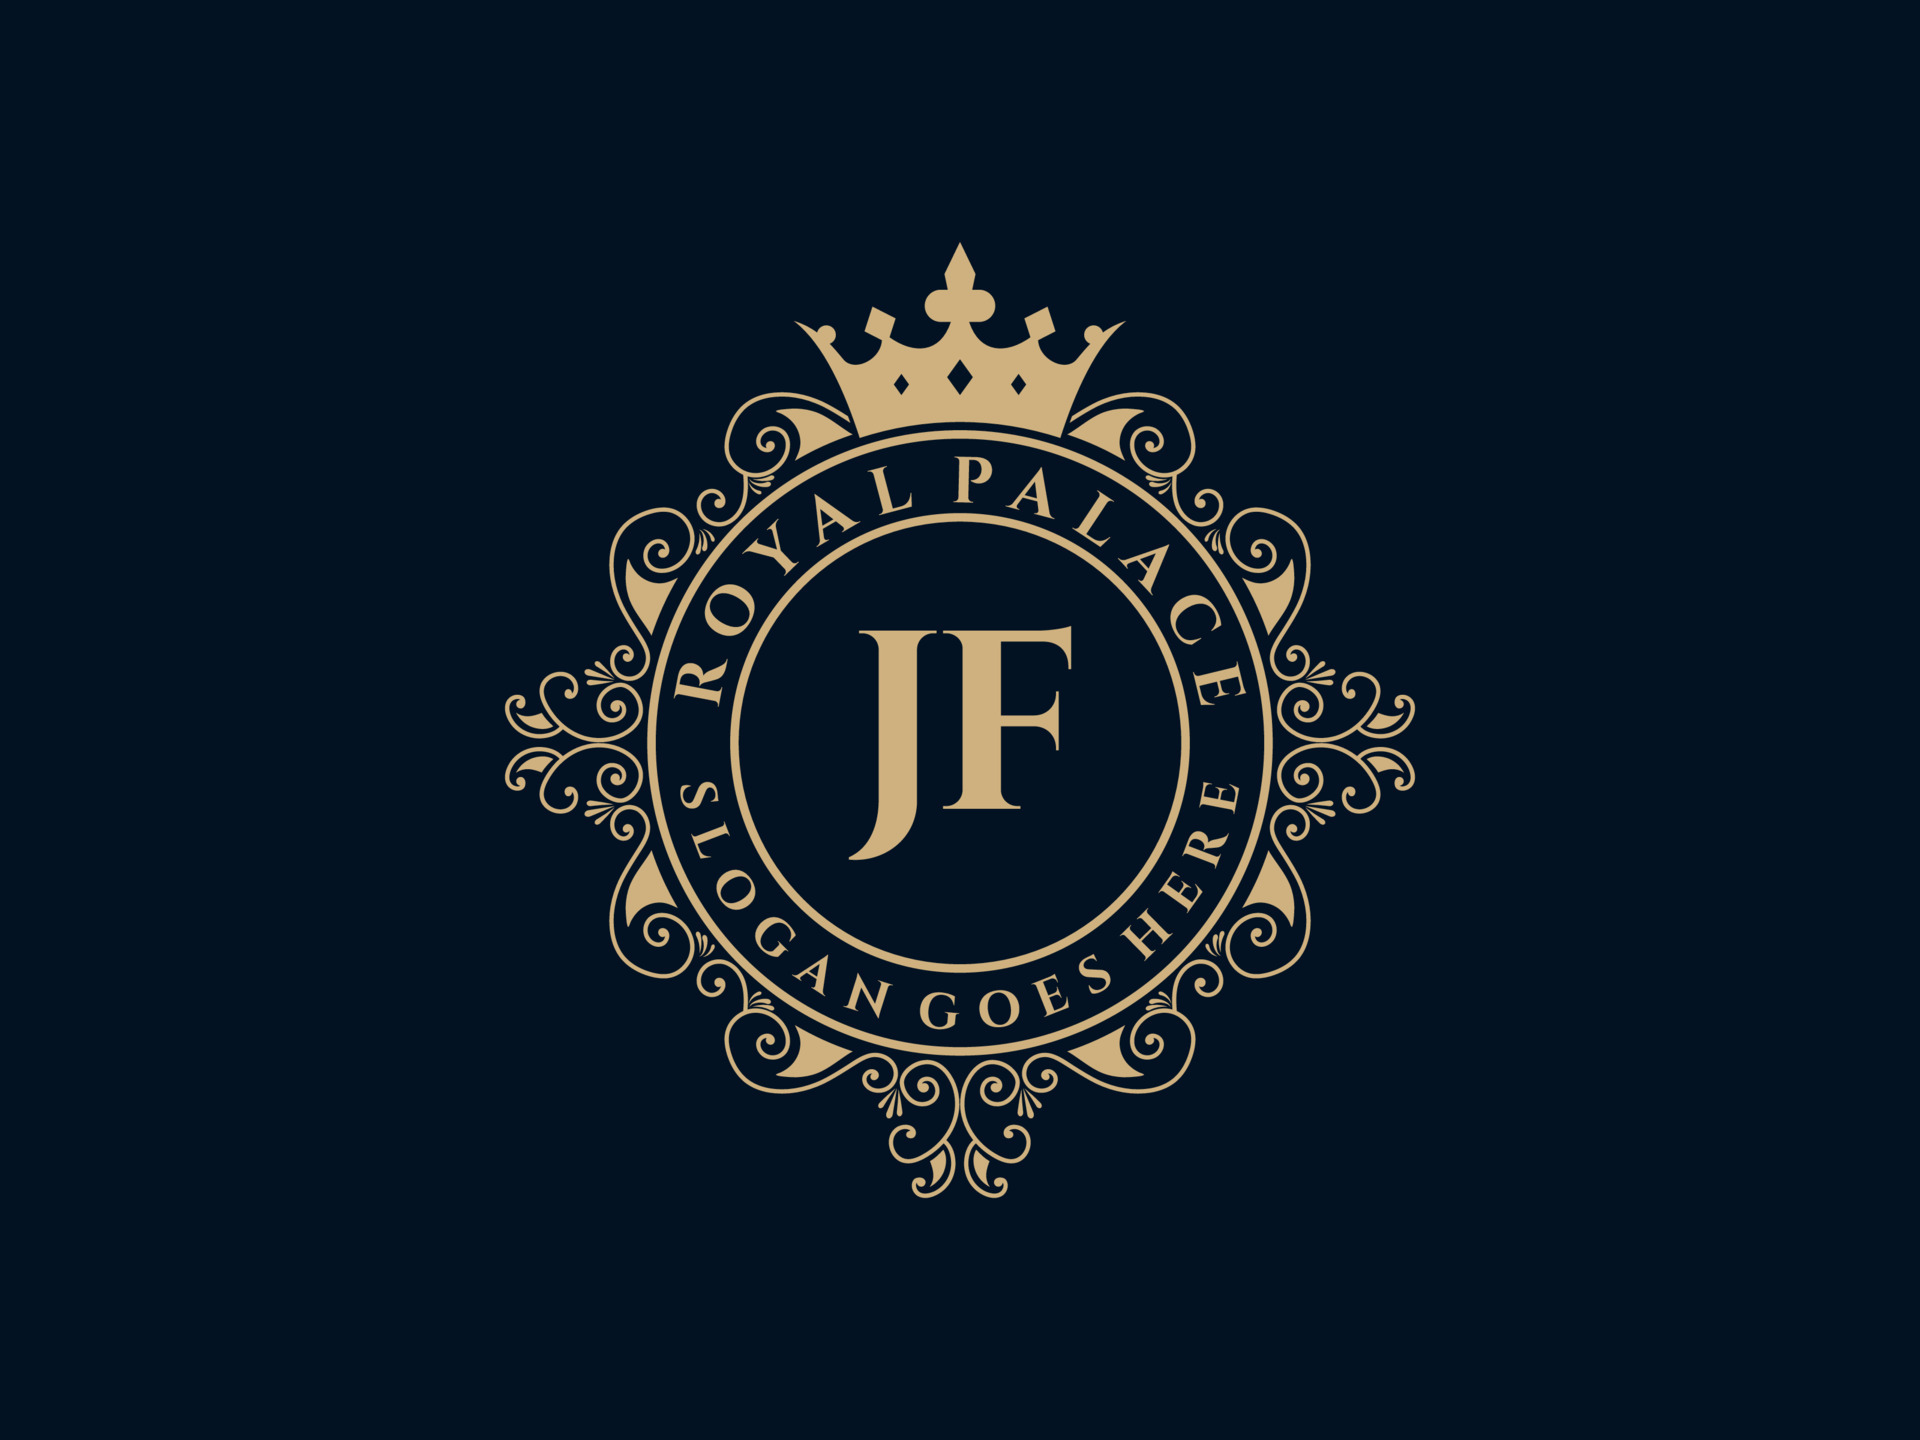 Jf designs, themes, templates and downloadable graphic elements on Dribbble